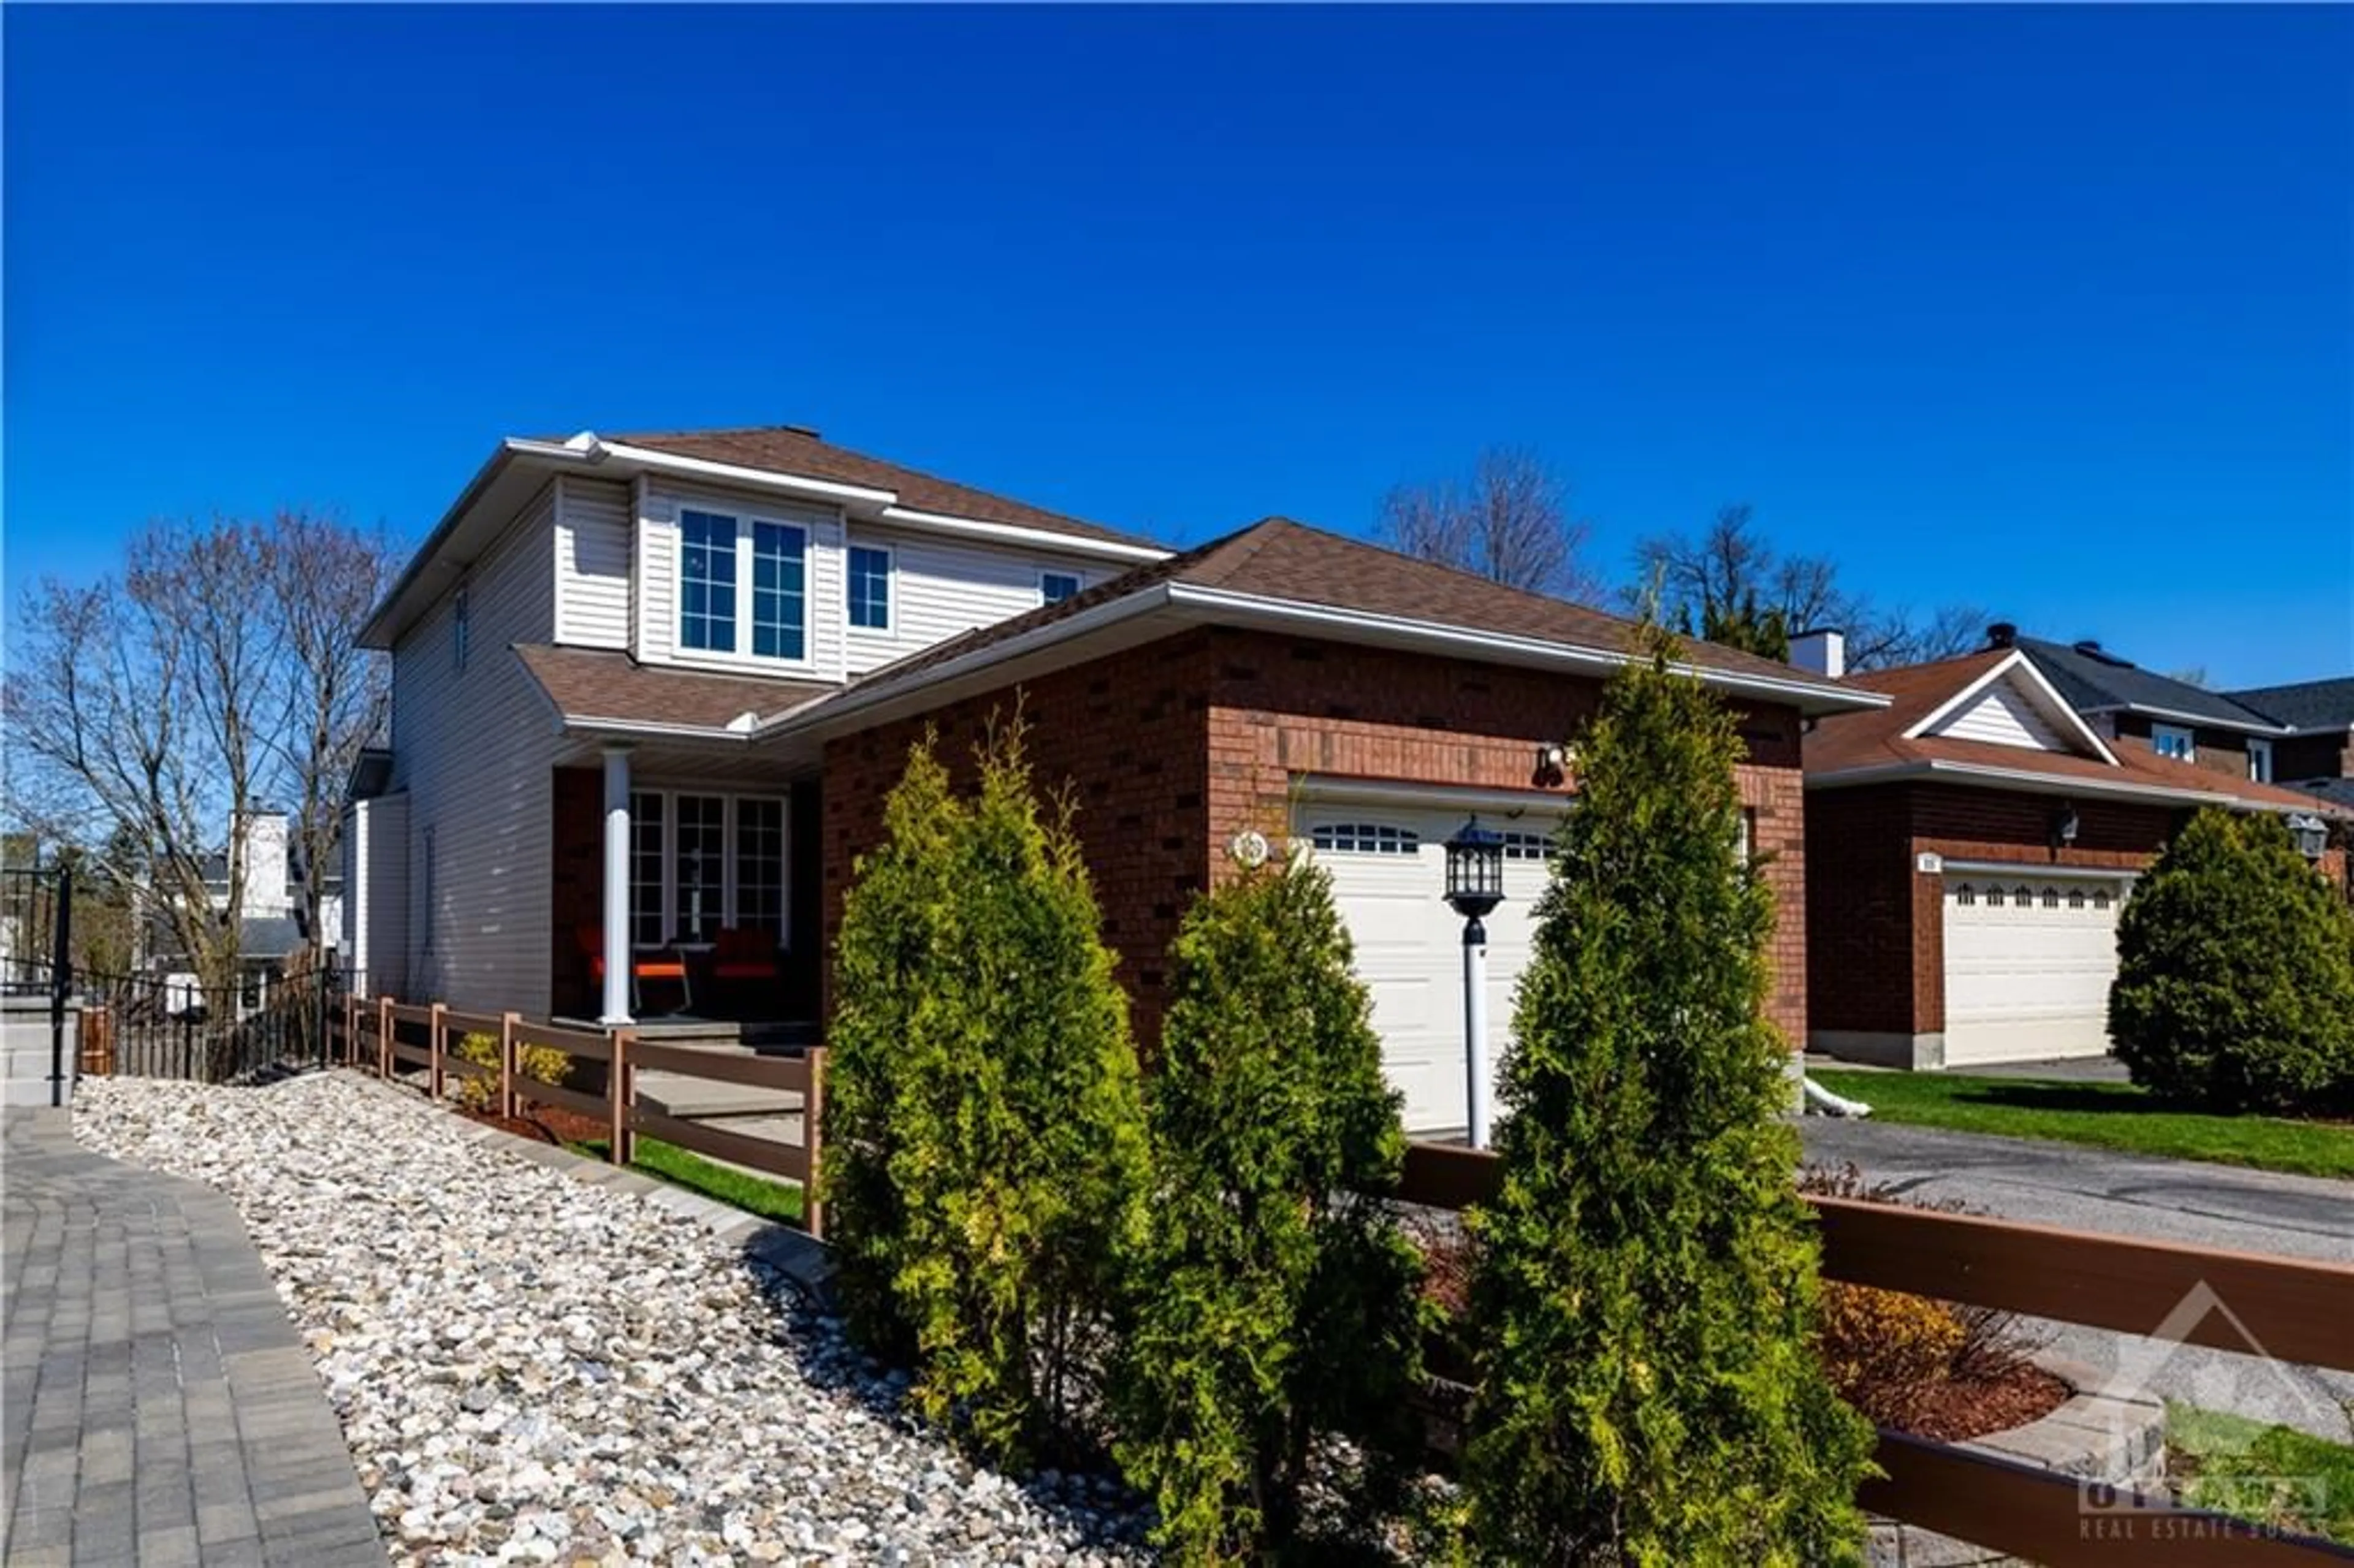 Home with brick exterior material for 109 MCCURDY Dr, Ottawa Ontario K2L 3W5